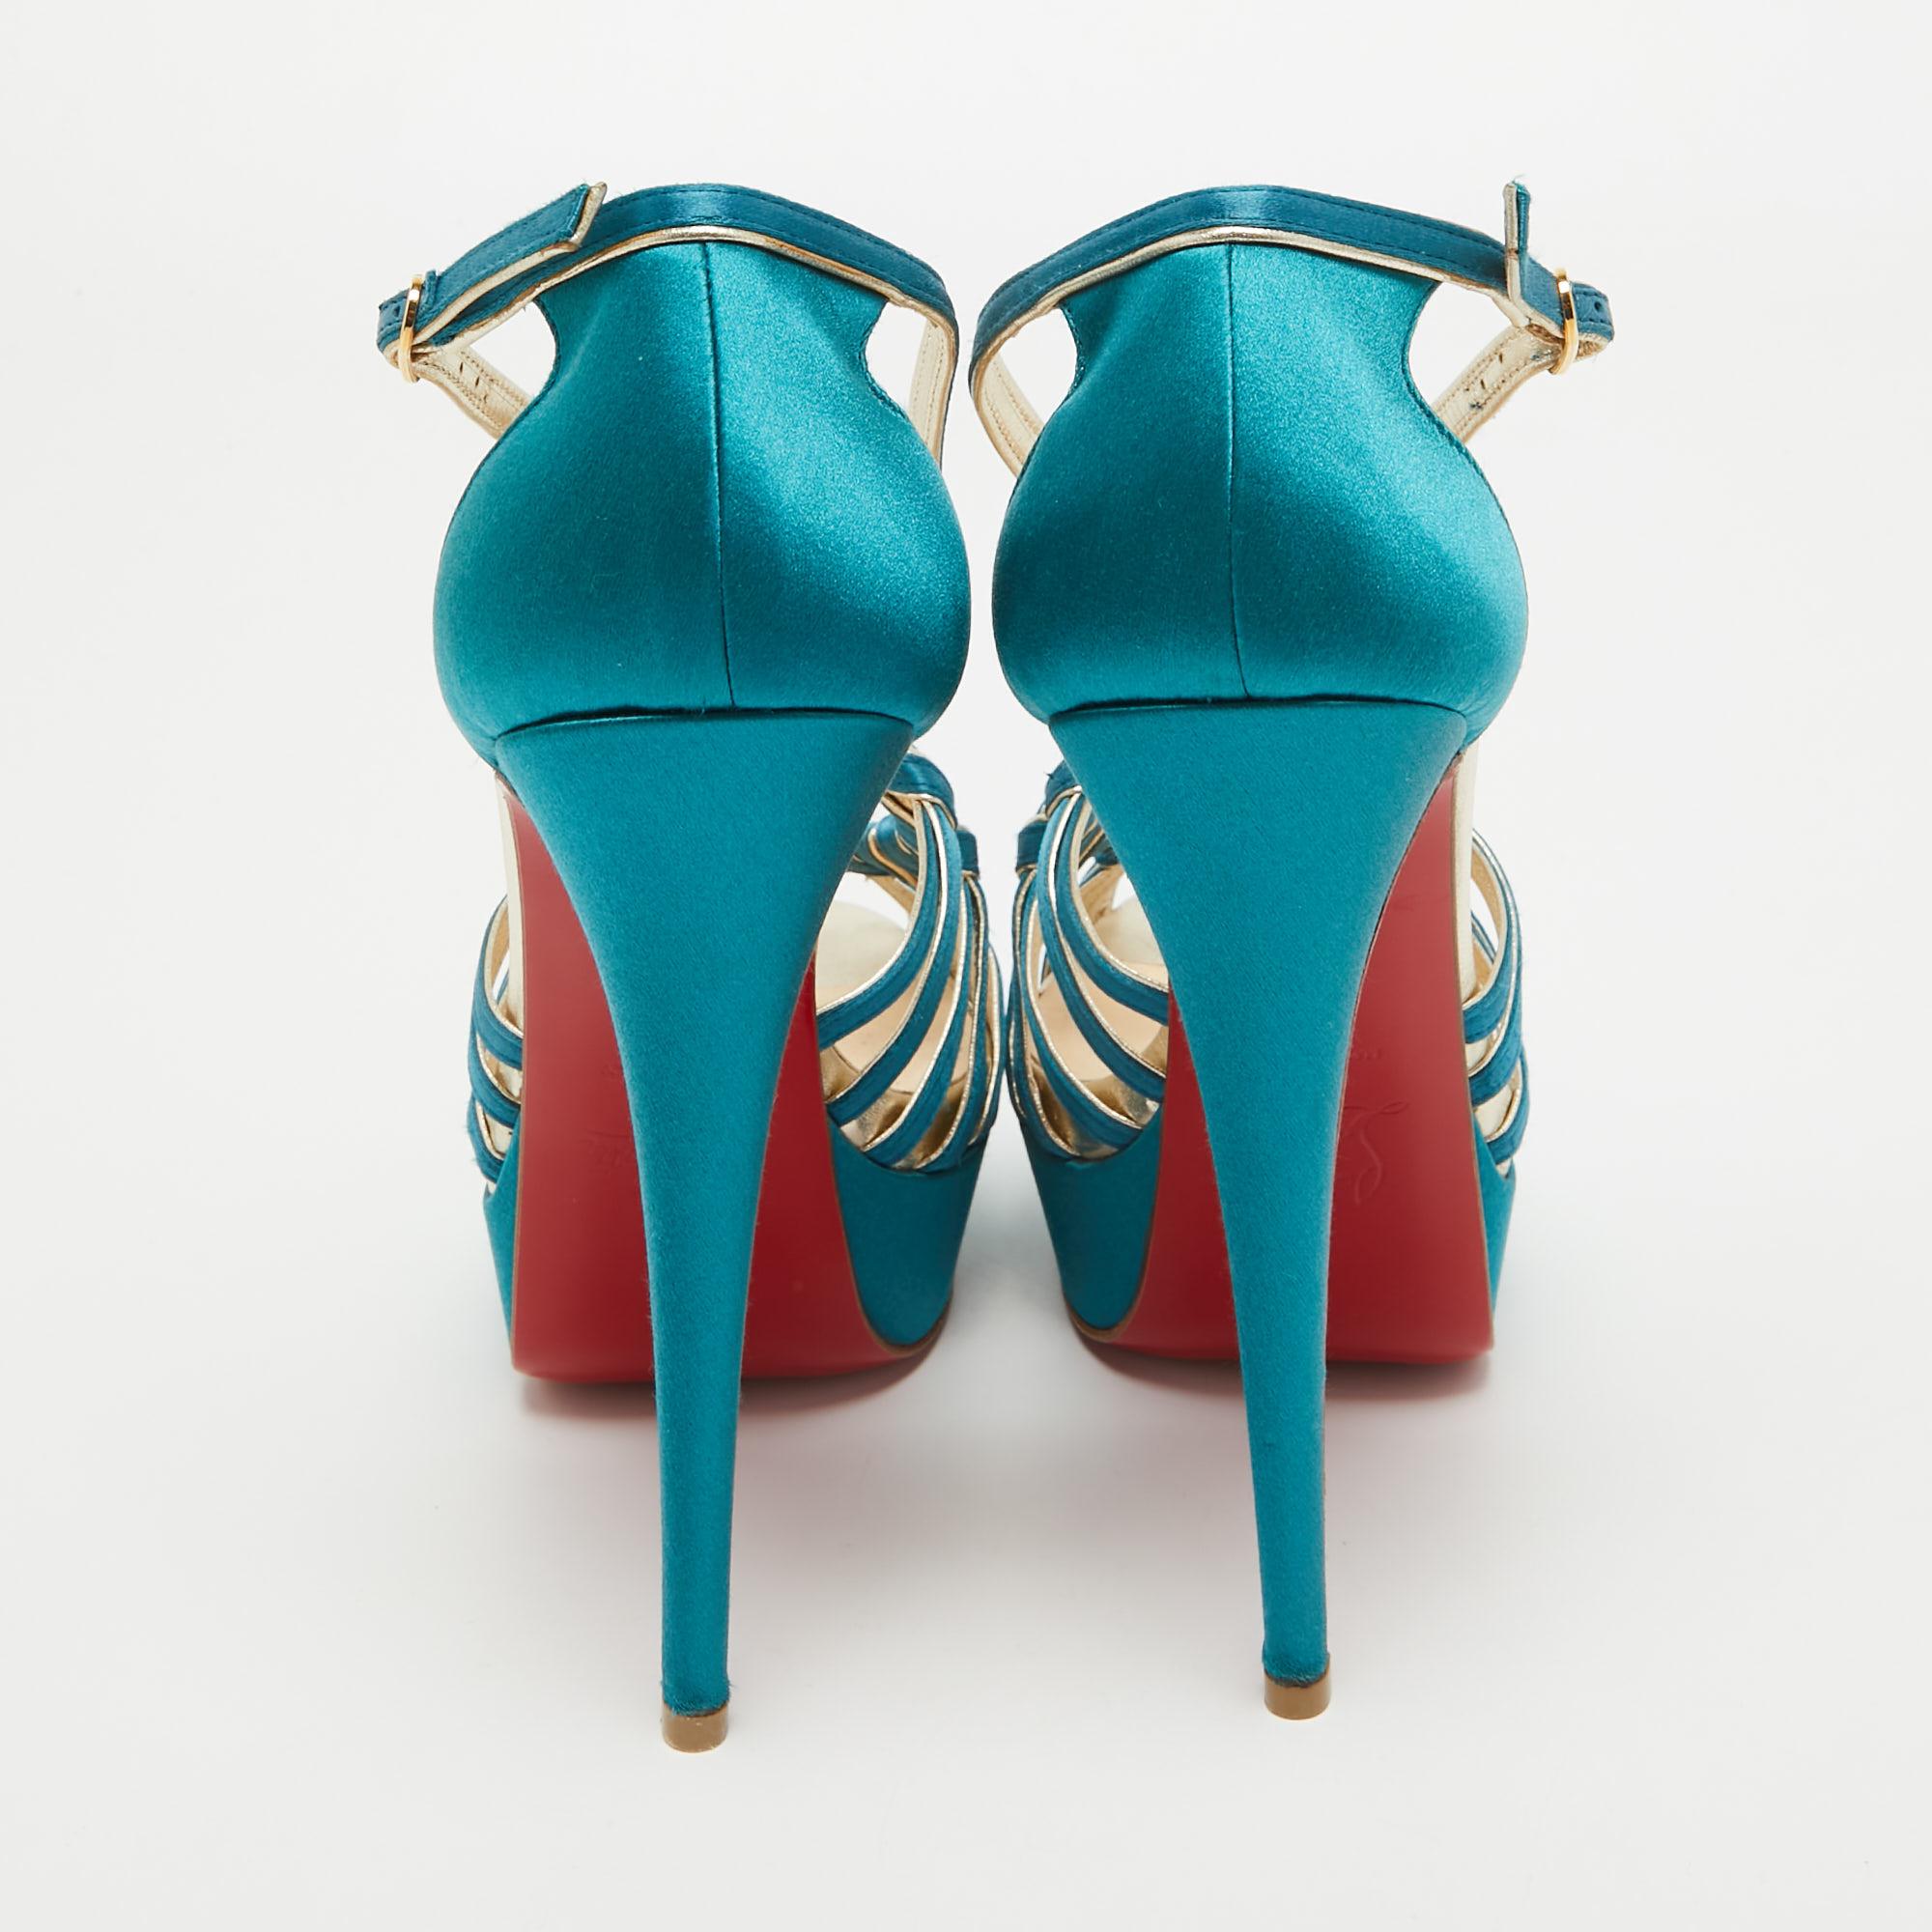 Christian Louboutin Teal Satin Knotted Strappy Platform Sandals Size 39 For Sale 4